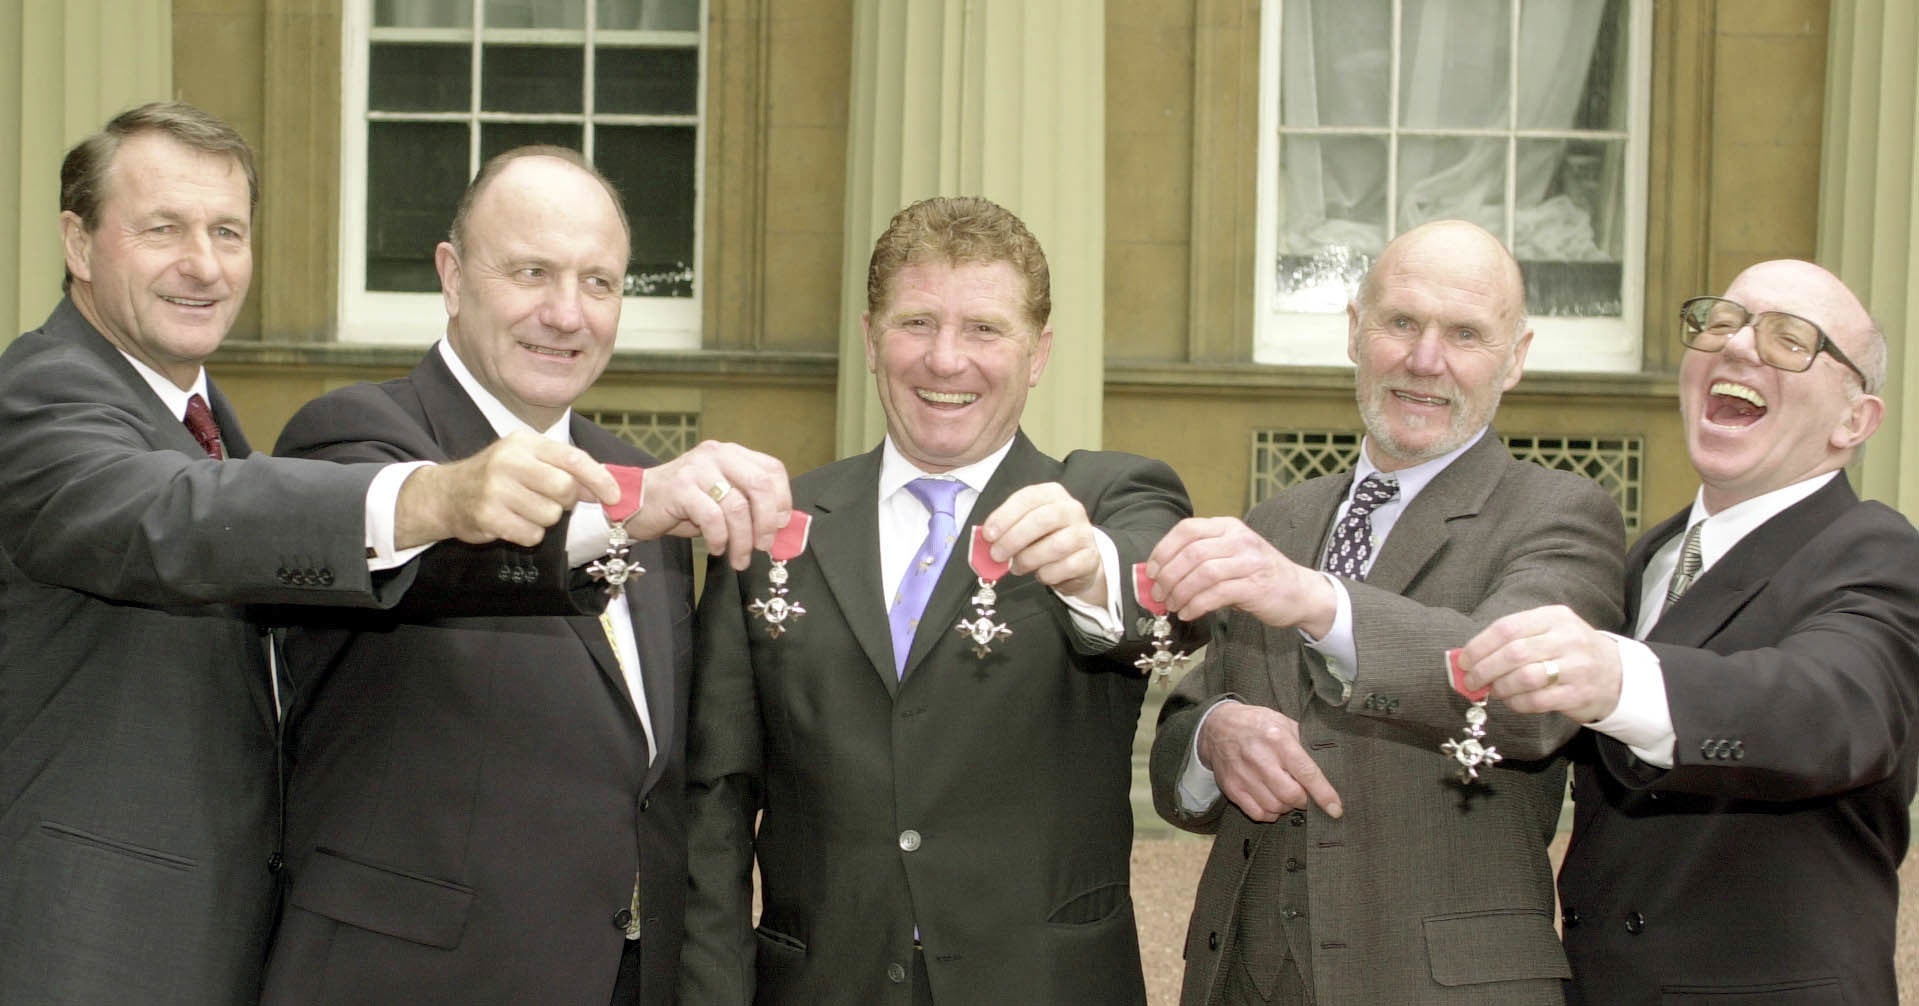 Alan Ball, centre, became an MBE in 2000 alongside fellow World Cup winners, left to right, Roger Hunt, George Cohen, Ray Wilson and Nobby Stiles (PA)